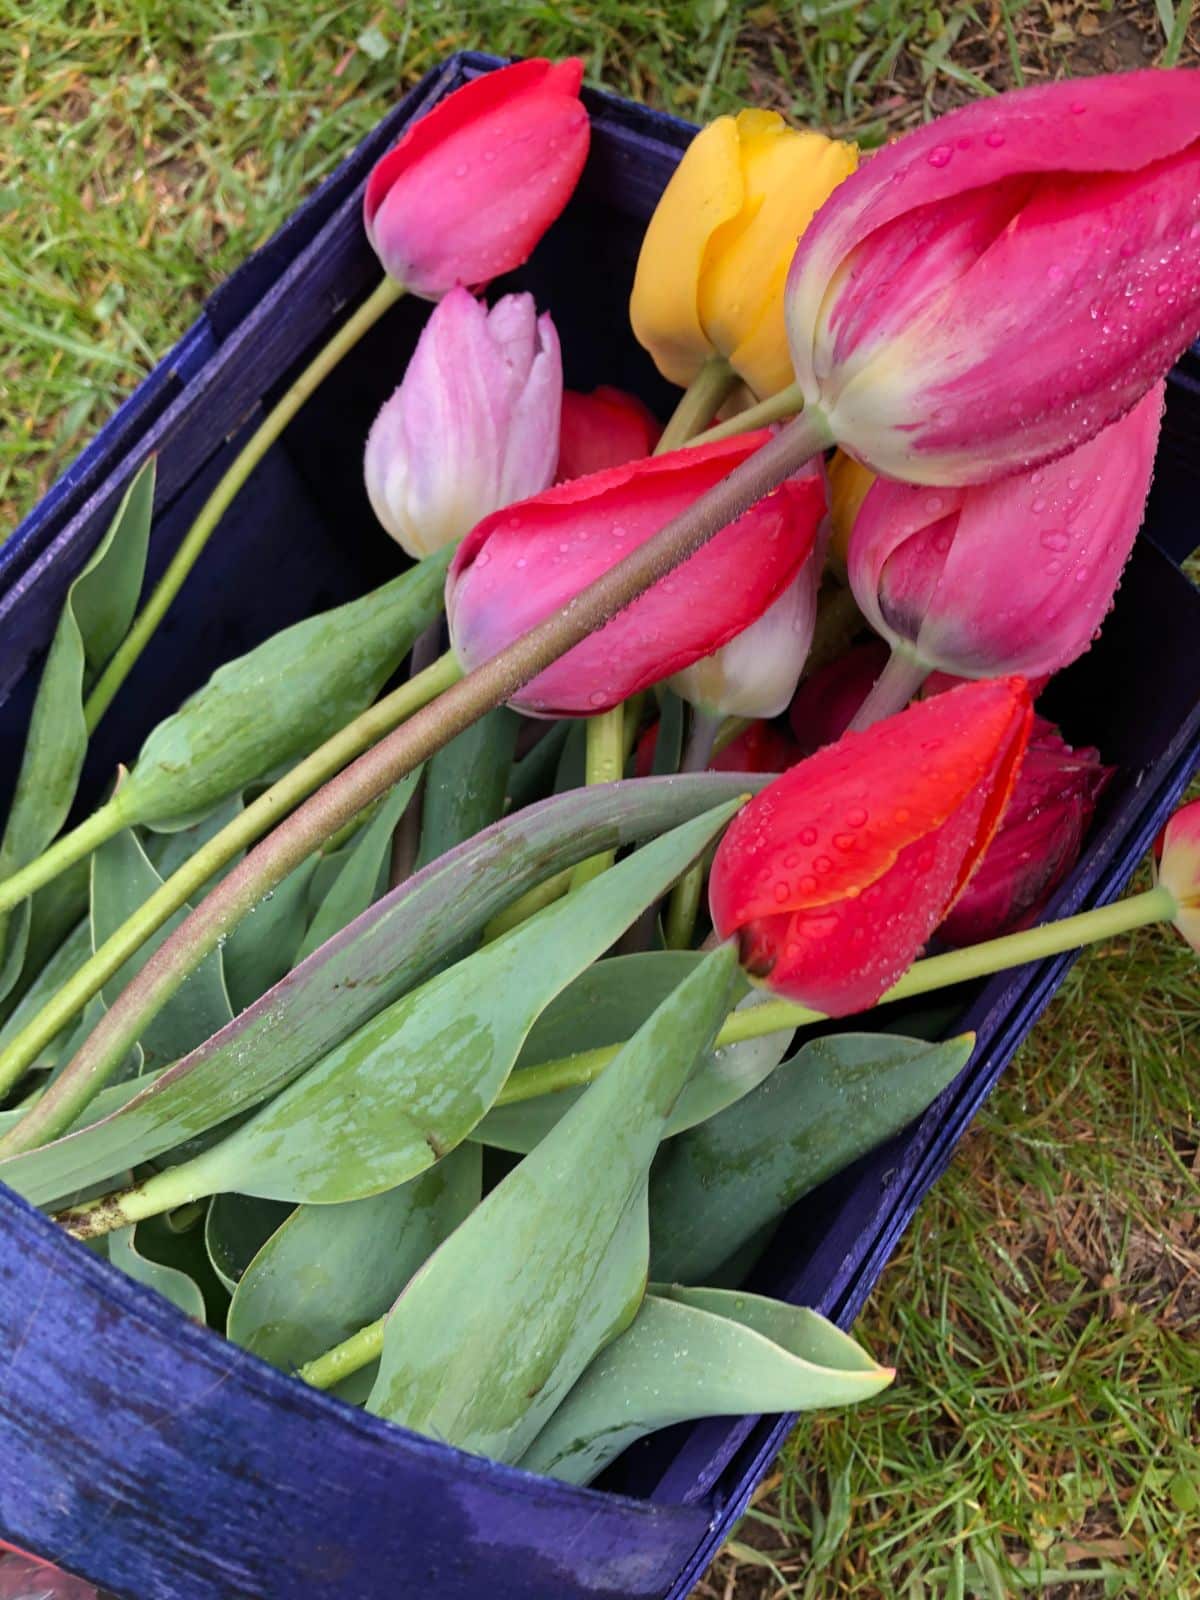 A basket of fresh picked spring tulips